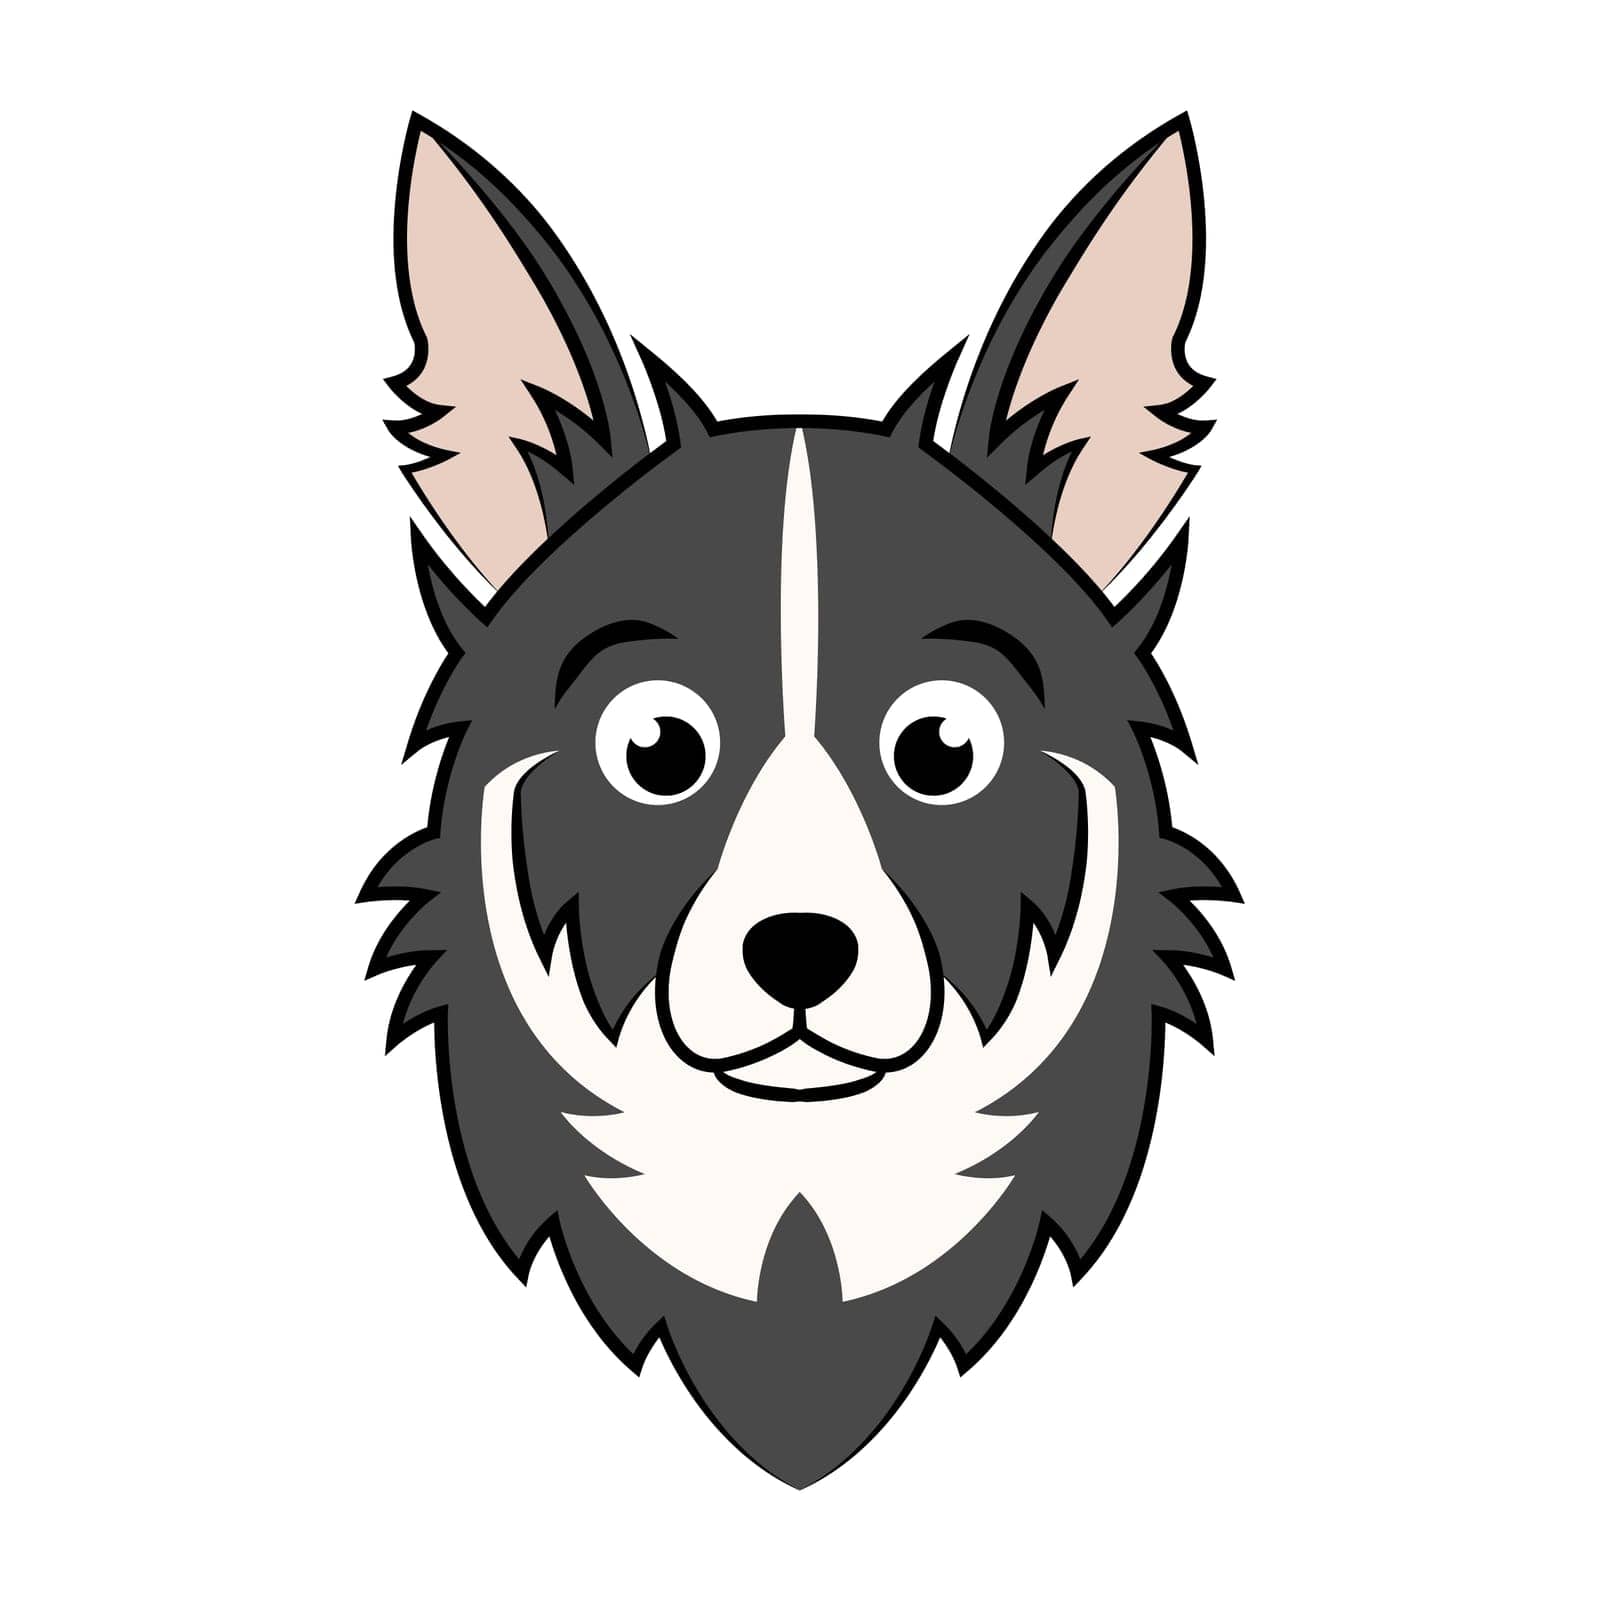 color image of border collie puppy dog head. Good use for symbol, mascot, icon, avatar, tattoo, T Shirt design, logo or any designcolor image of border collie puppy dog head. Good use for symbol, mascot, icon, avatar, tattoo, T Shirt design, logo or any design by Dear_s_Gallery